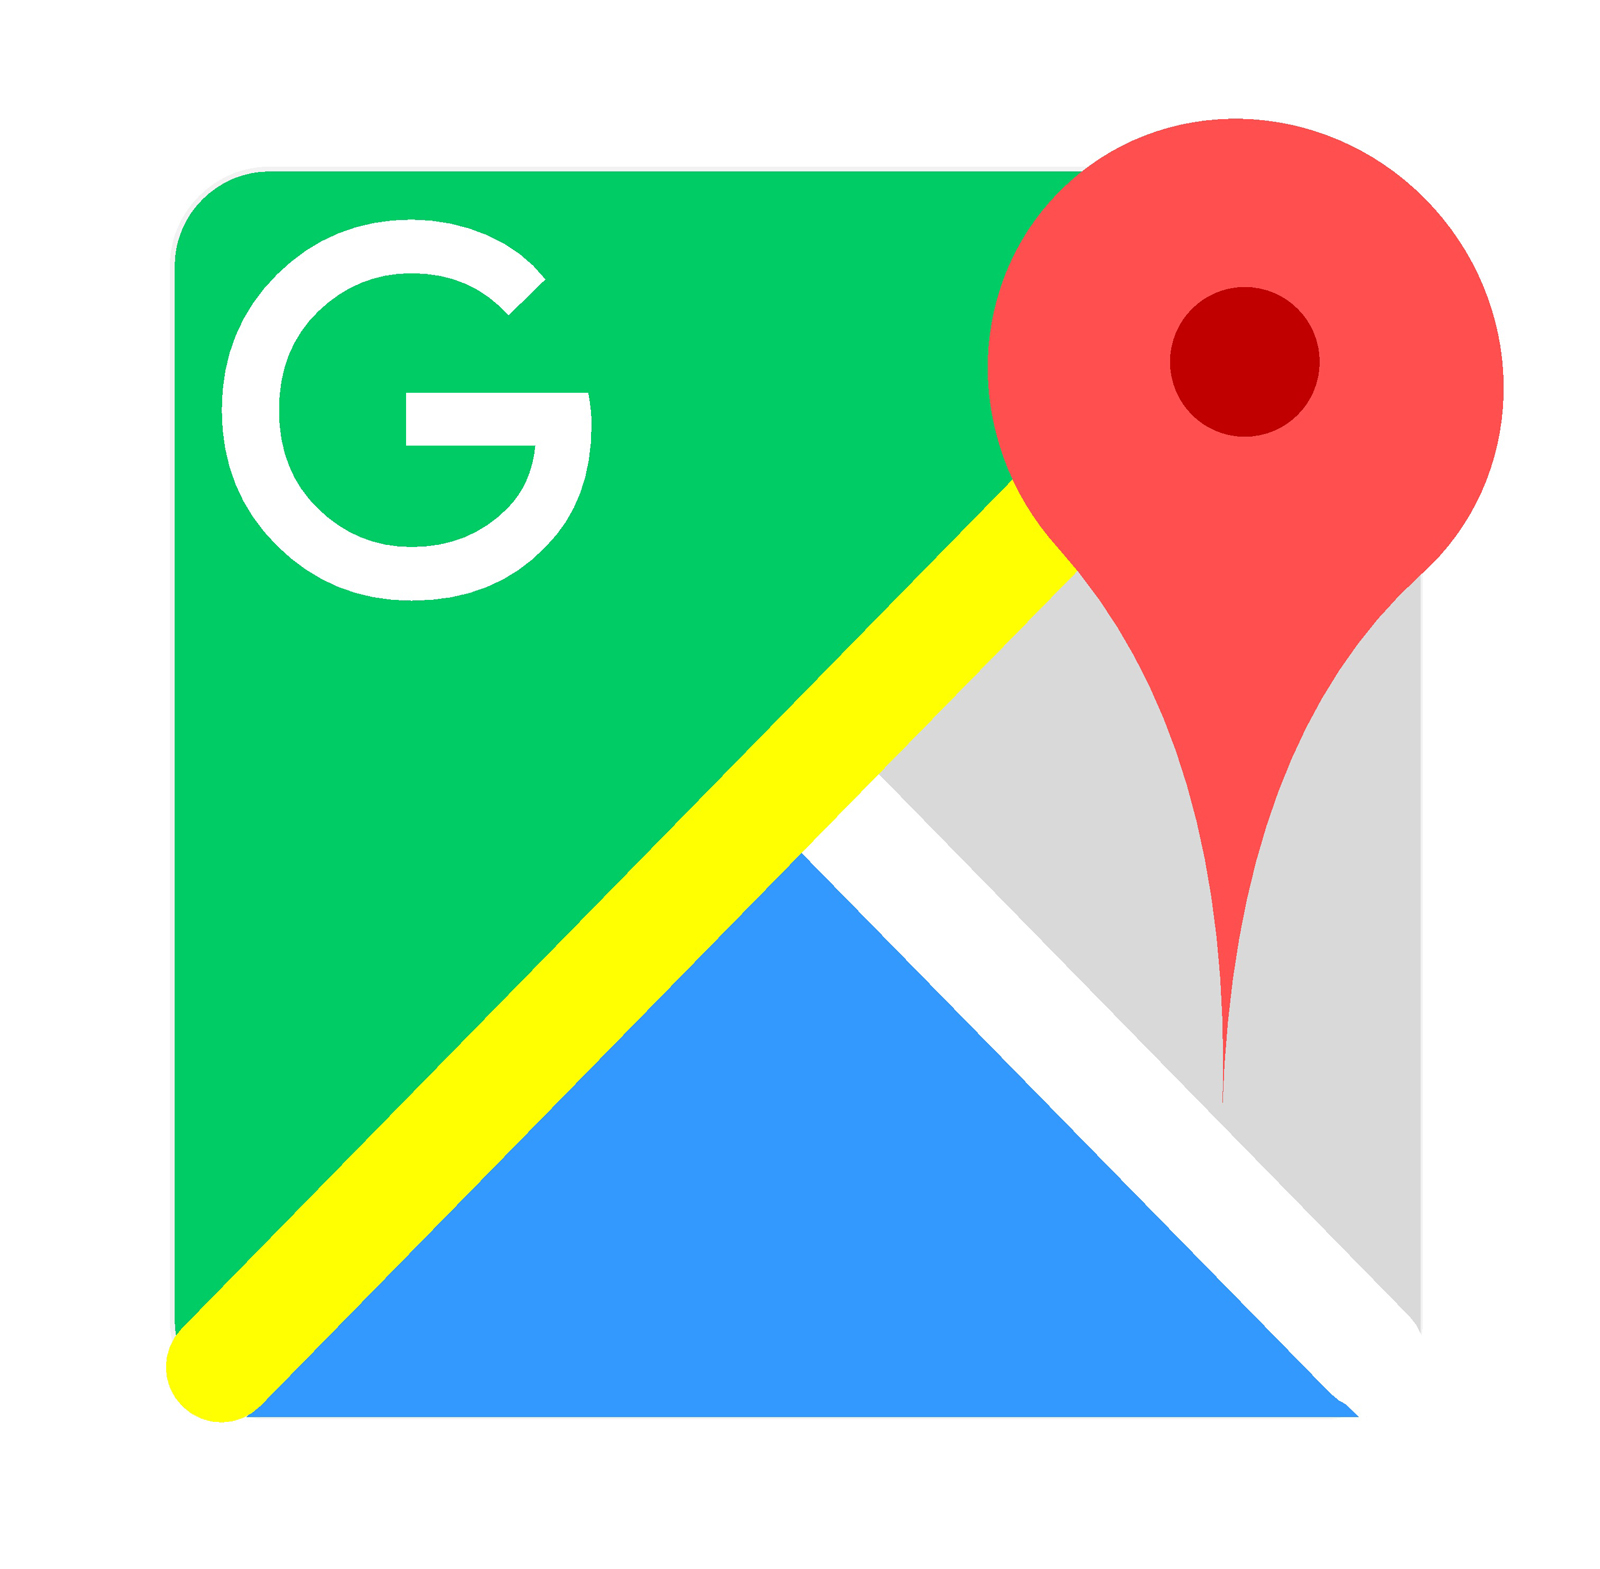 The Google Maps app icon on mobile phone